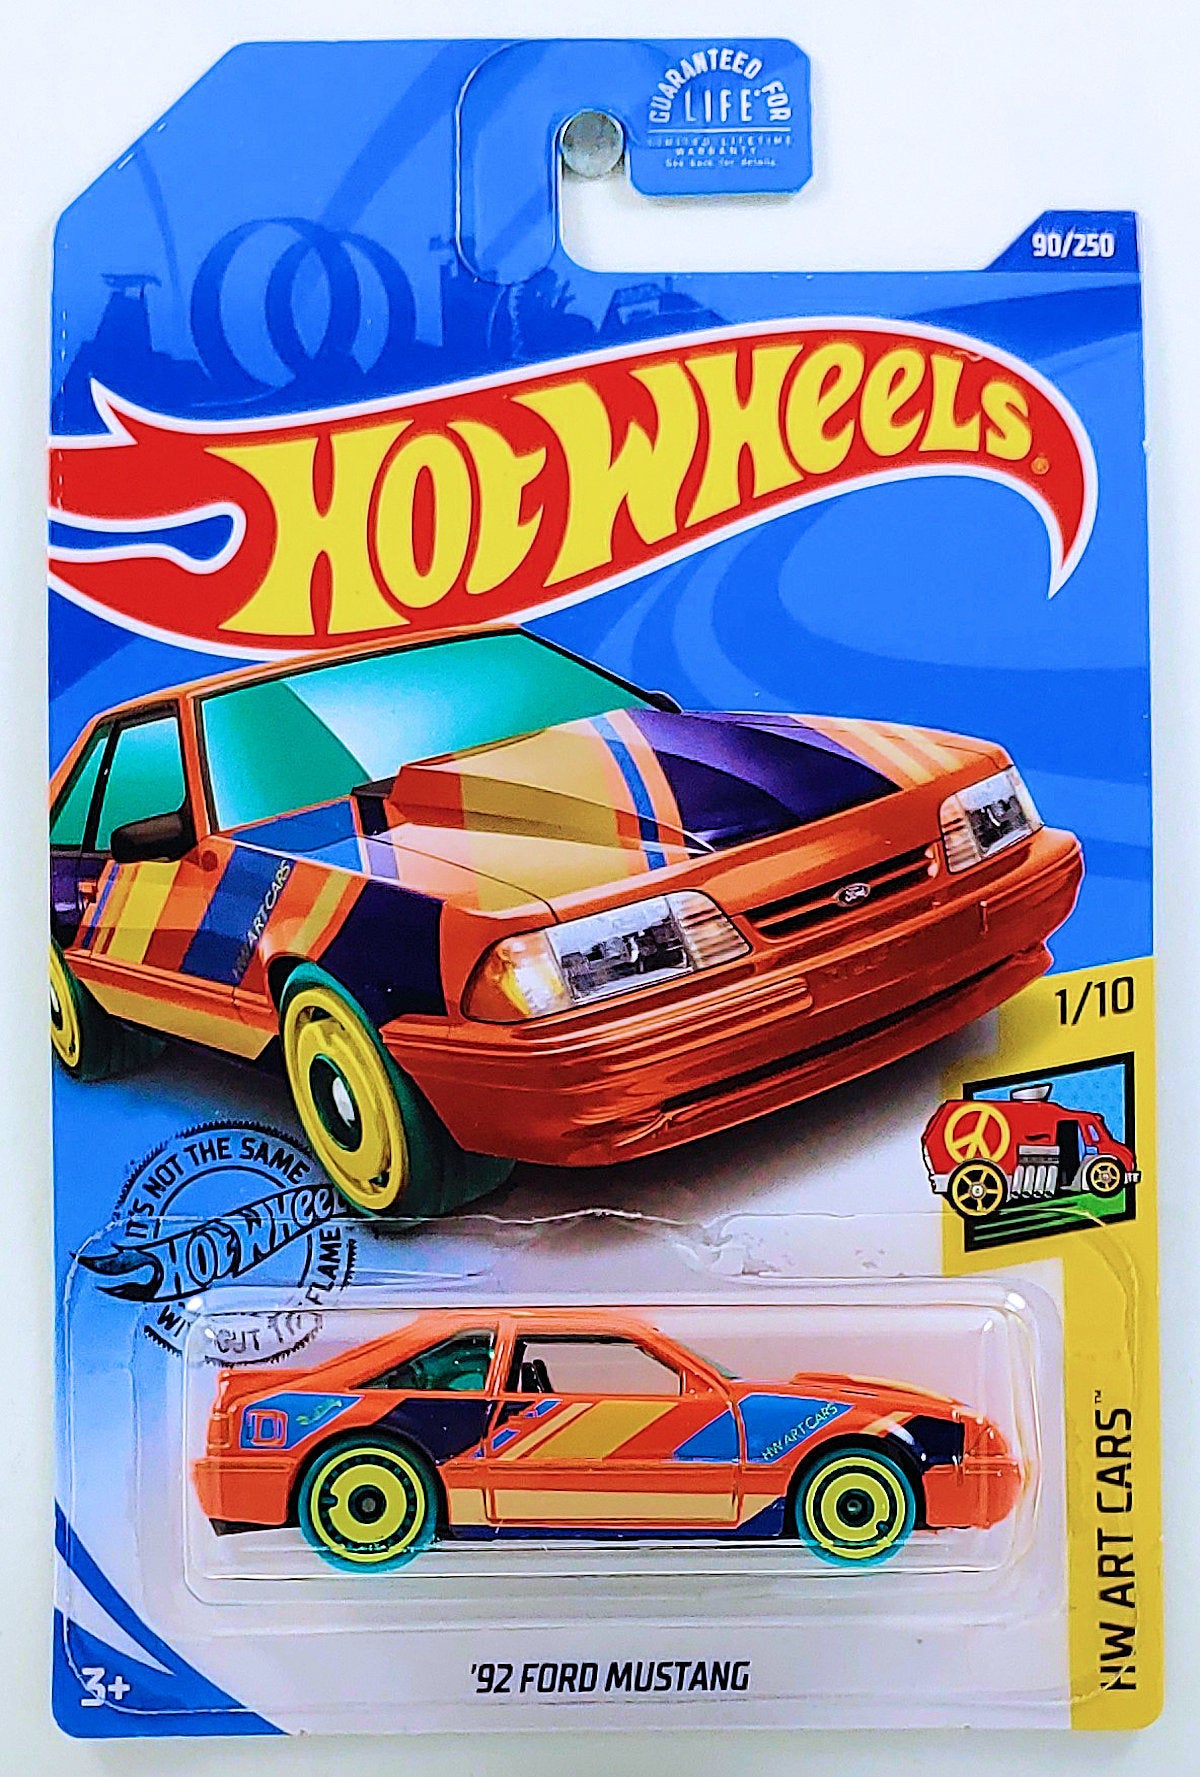 Hot Wheels 2020 - Collector # 090/250 - HW Art Cars 1/10 - ’92 Ford Mustang - Orange